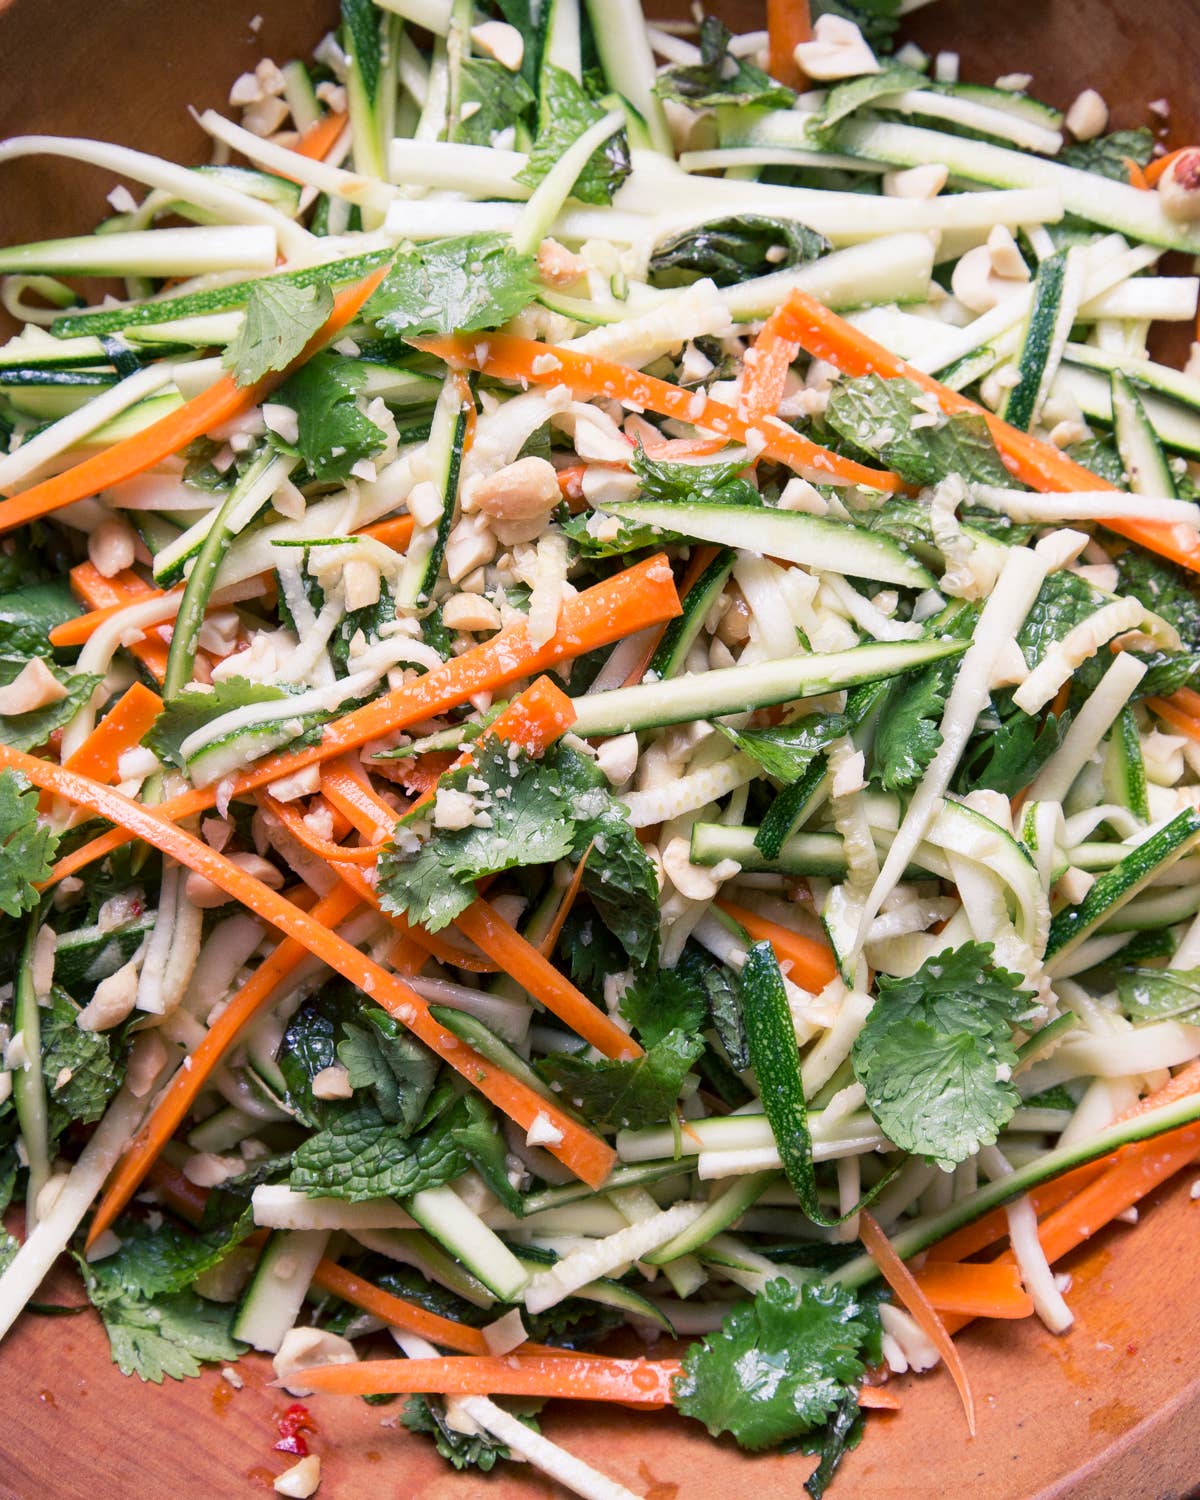 Spicy Thai-Style Zucchini Carrot Salad